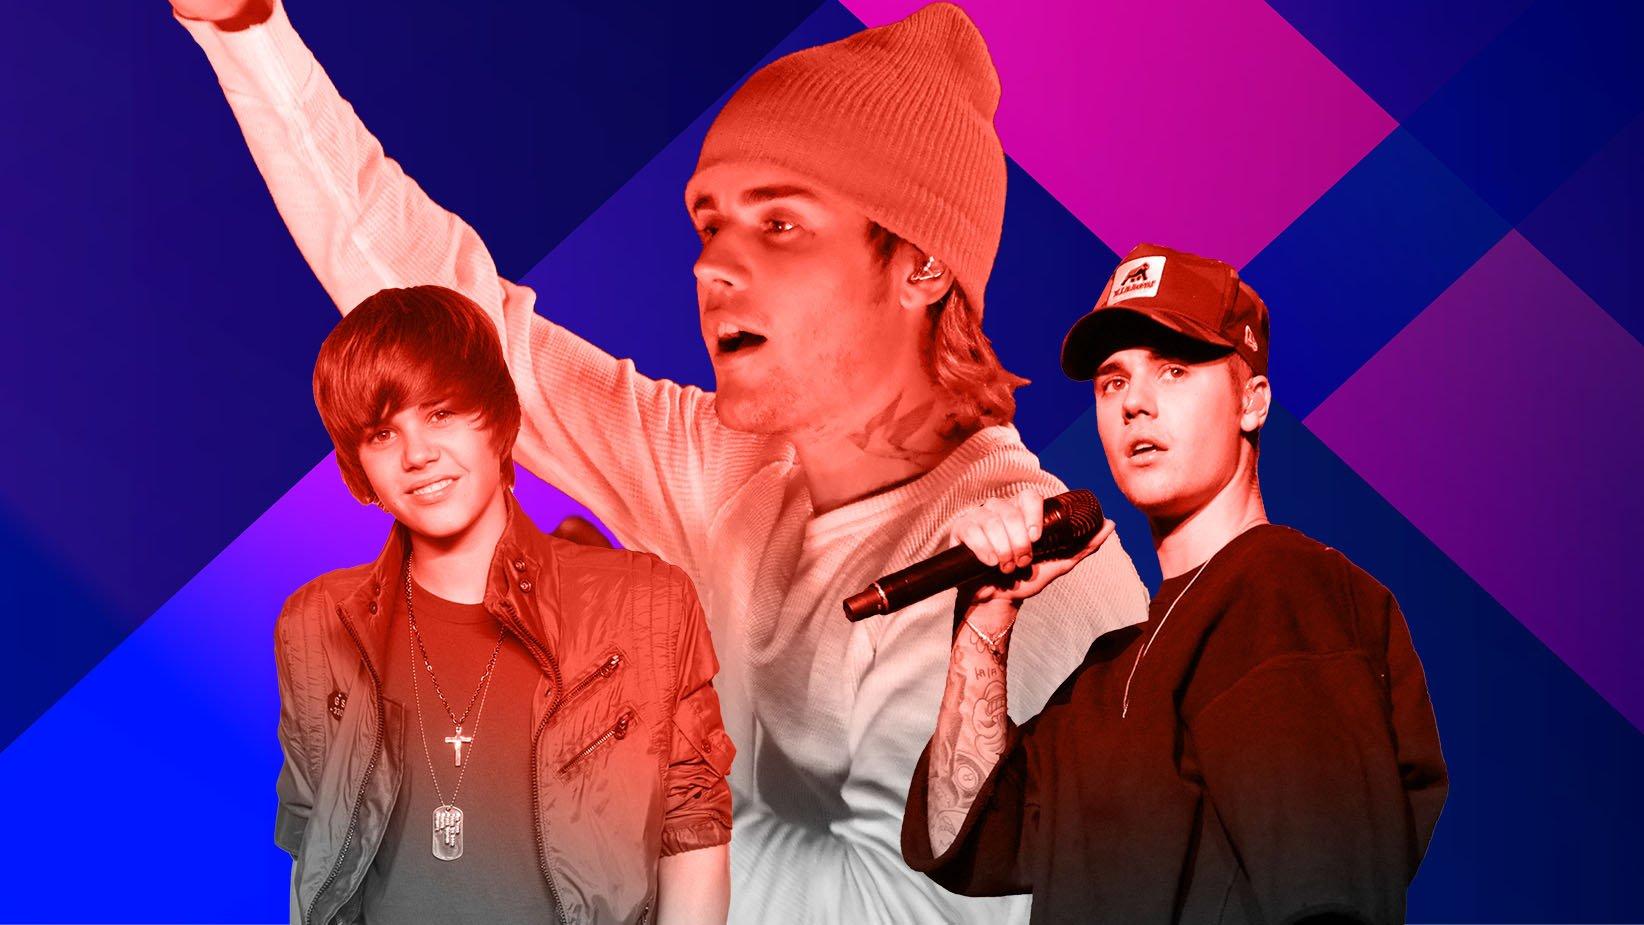 Justin Bieber Breaks A New Record With 'Ghost